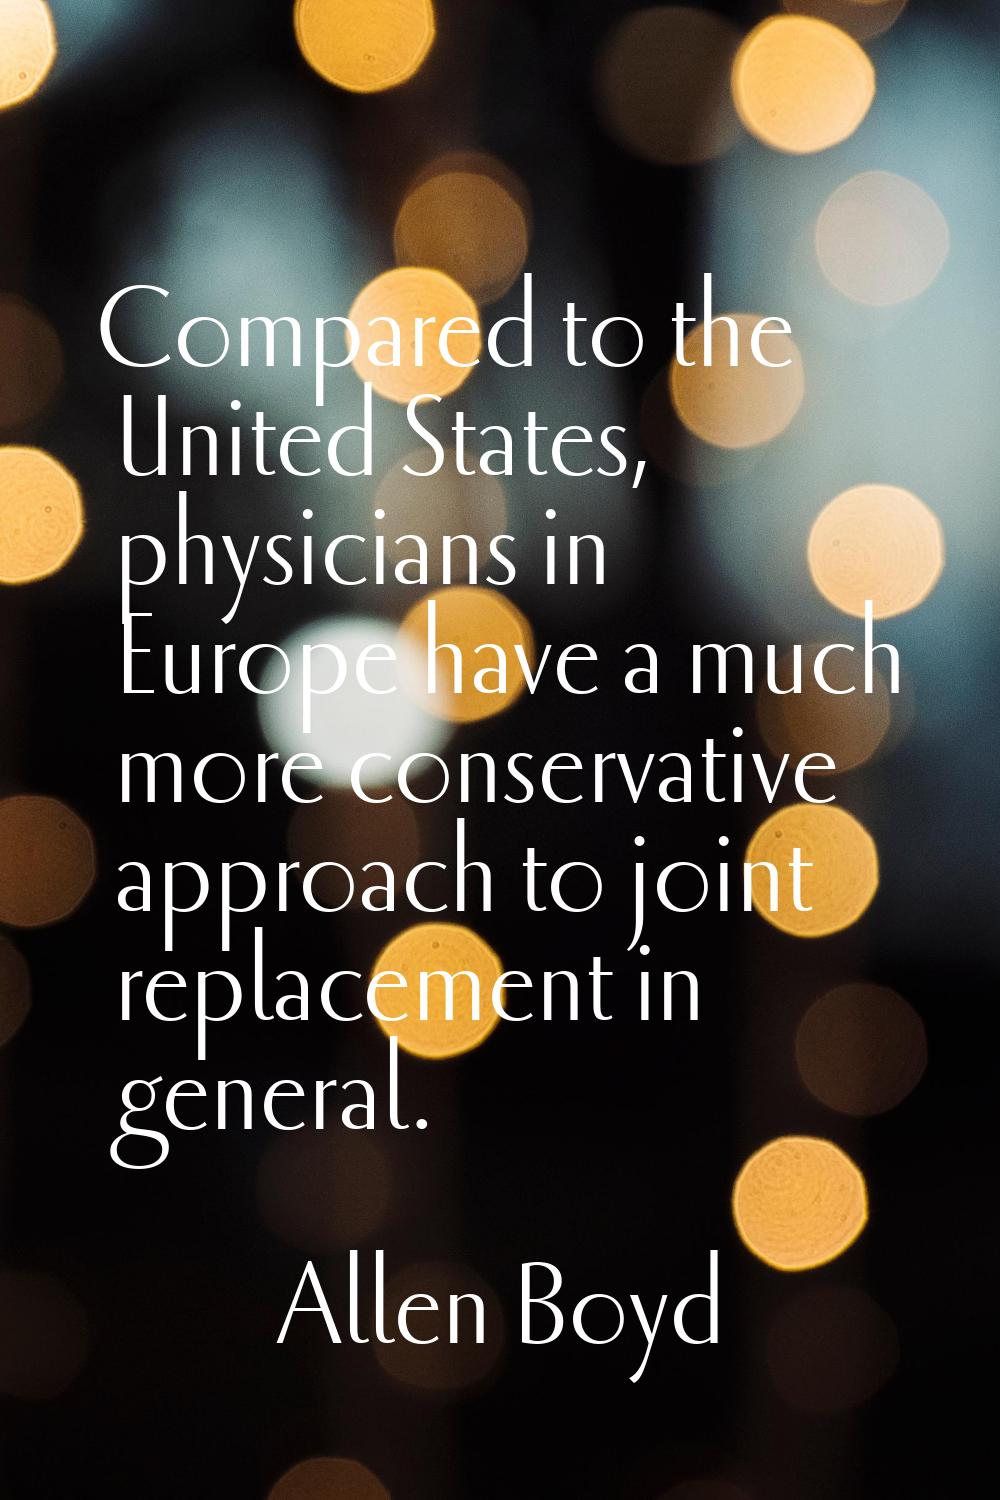 Compared to the United States, physicians in Europe have a much more conservative approach to joint